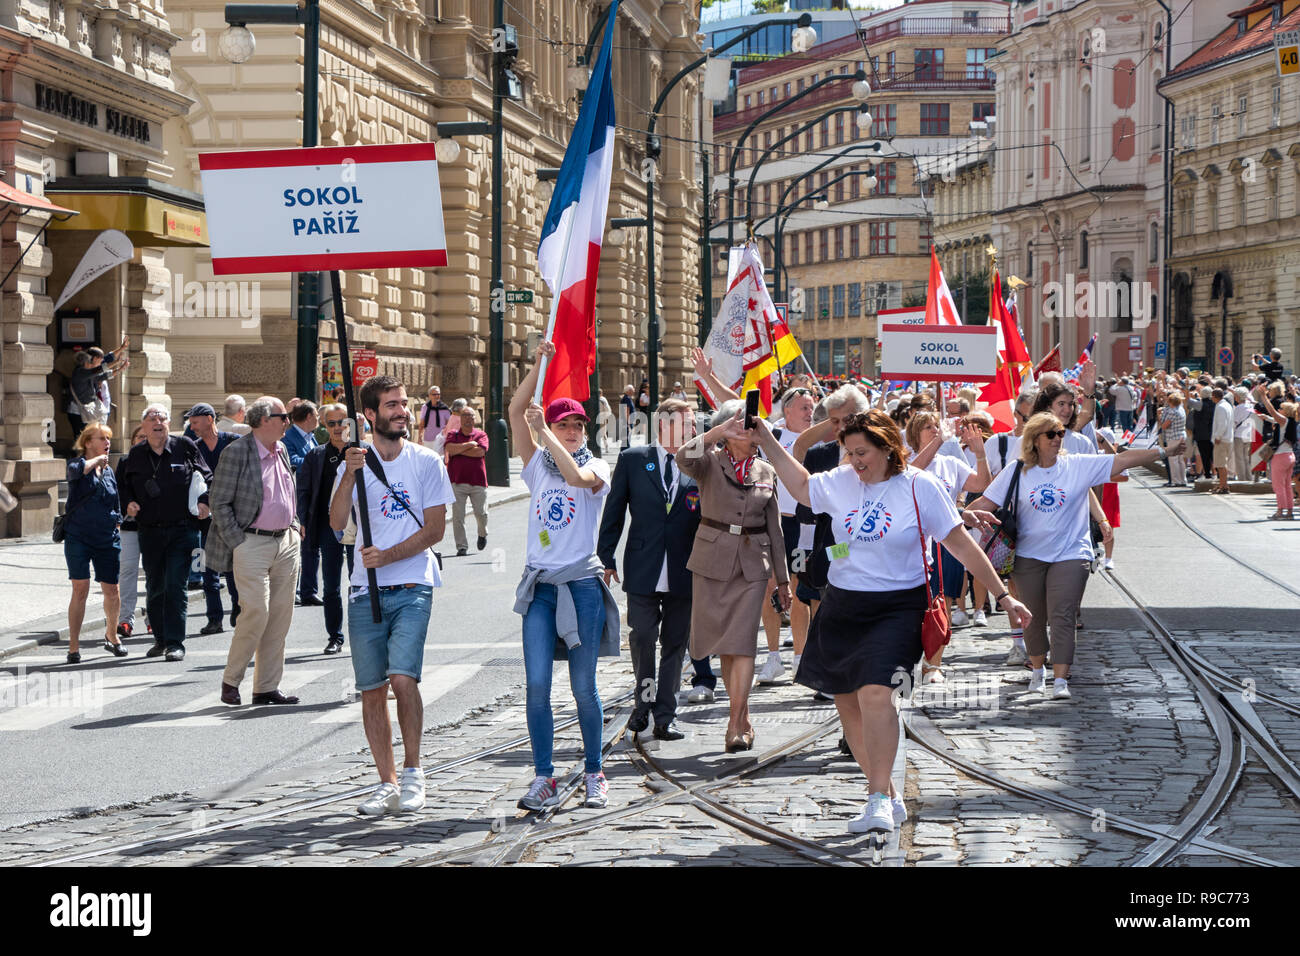 PRAGUE, CZECH REPUBLIC - JULY 1, 2018: Visitors from Paris parading at Sokolsky Slet, a once-every-six-years gathering of the Sokol movement - a Czech Stock Photo